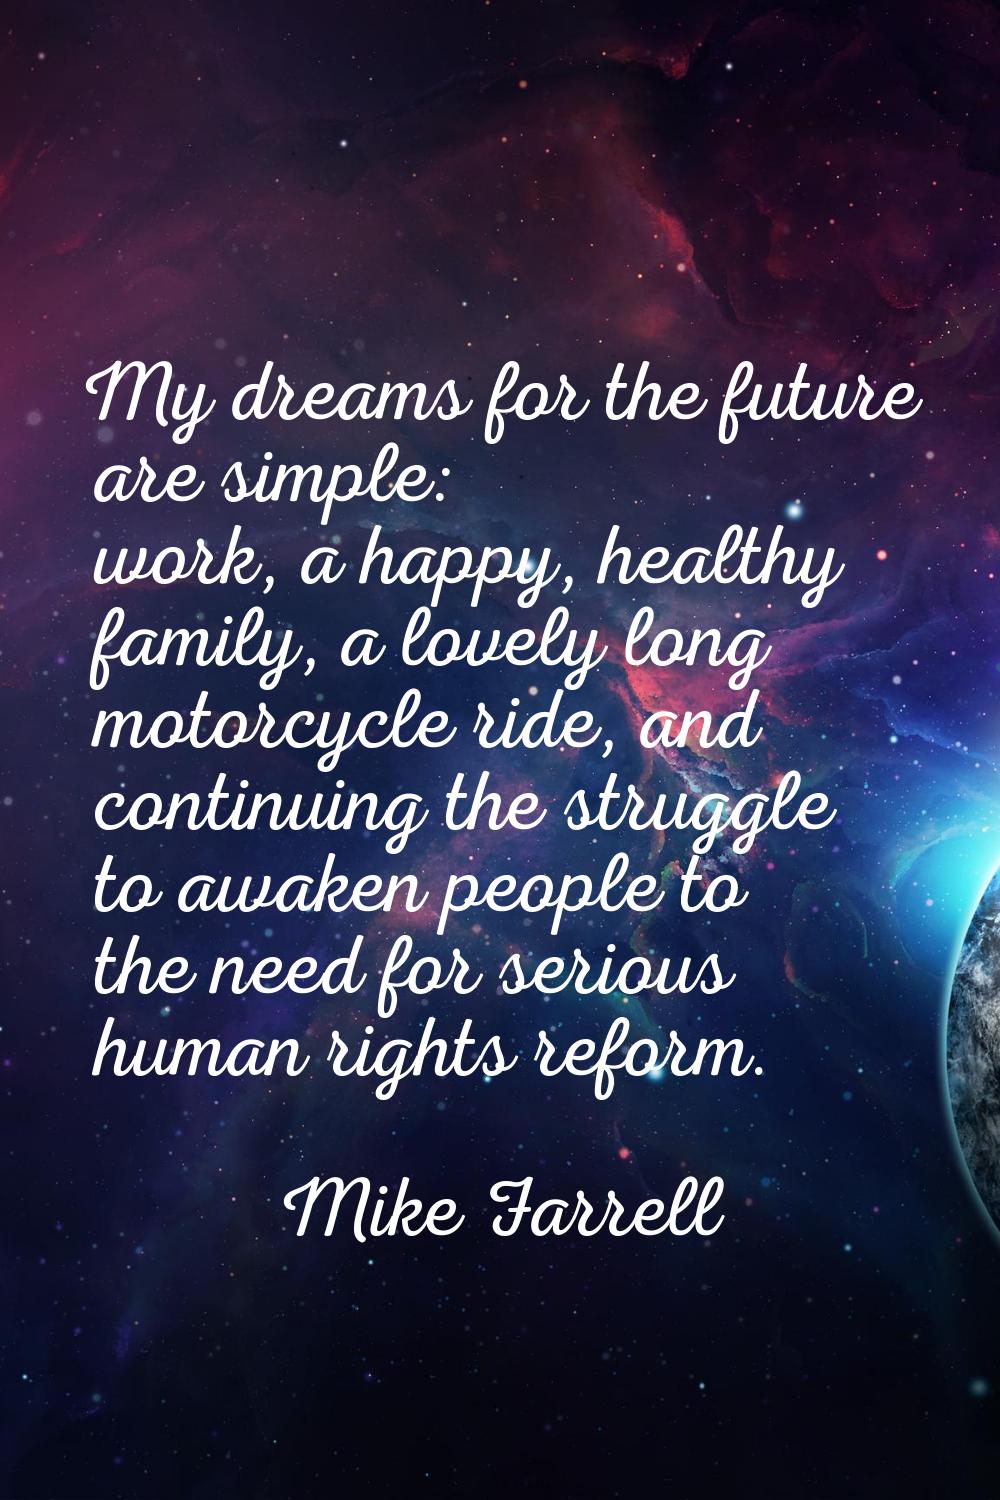 My dreams for the future are simple: work, a happy, healthy family, a lovely long motorcycle ride, 